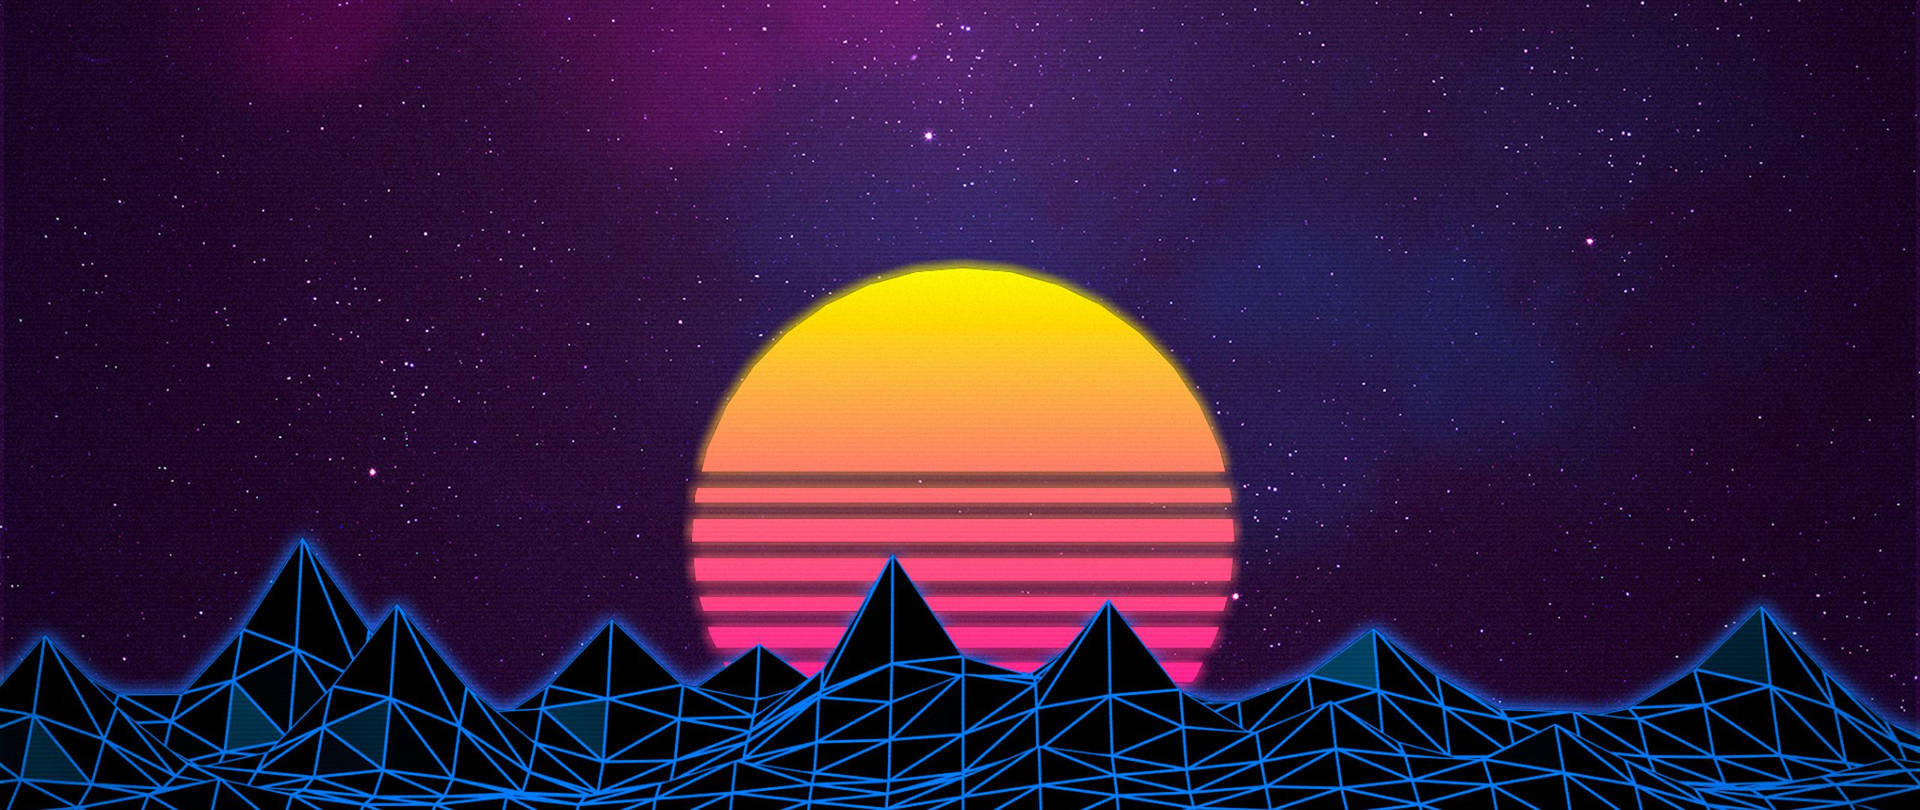 Retro Moon With Lines Background